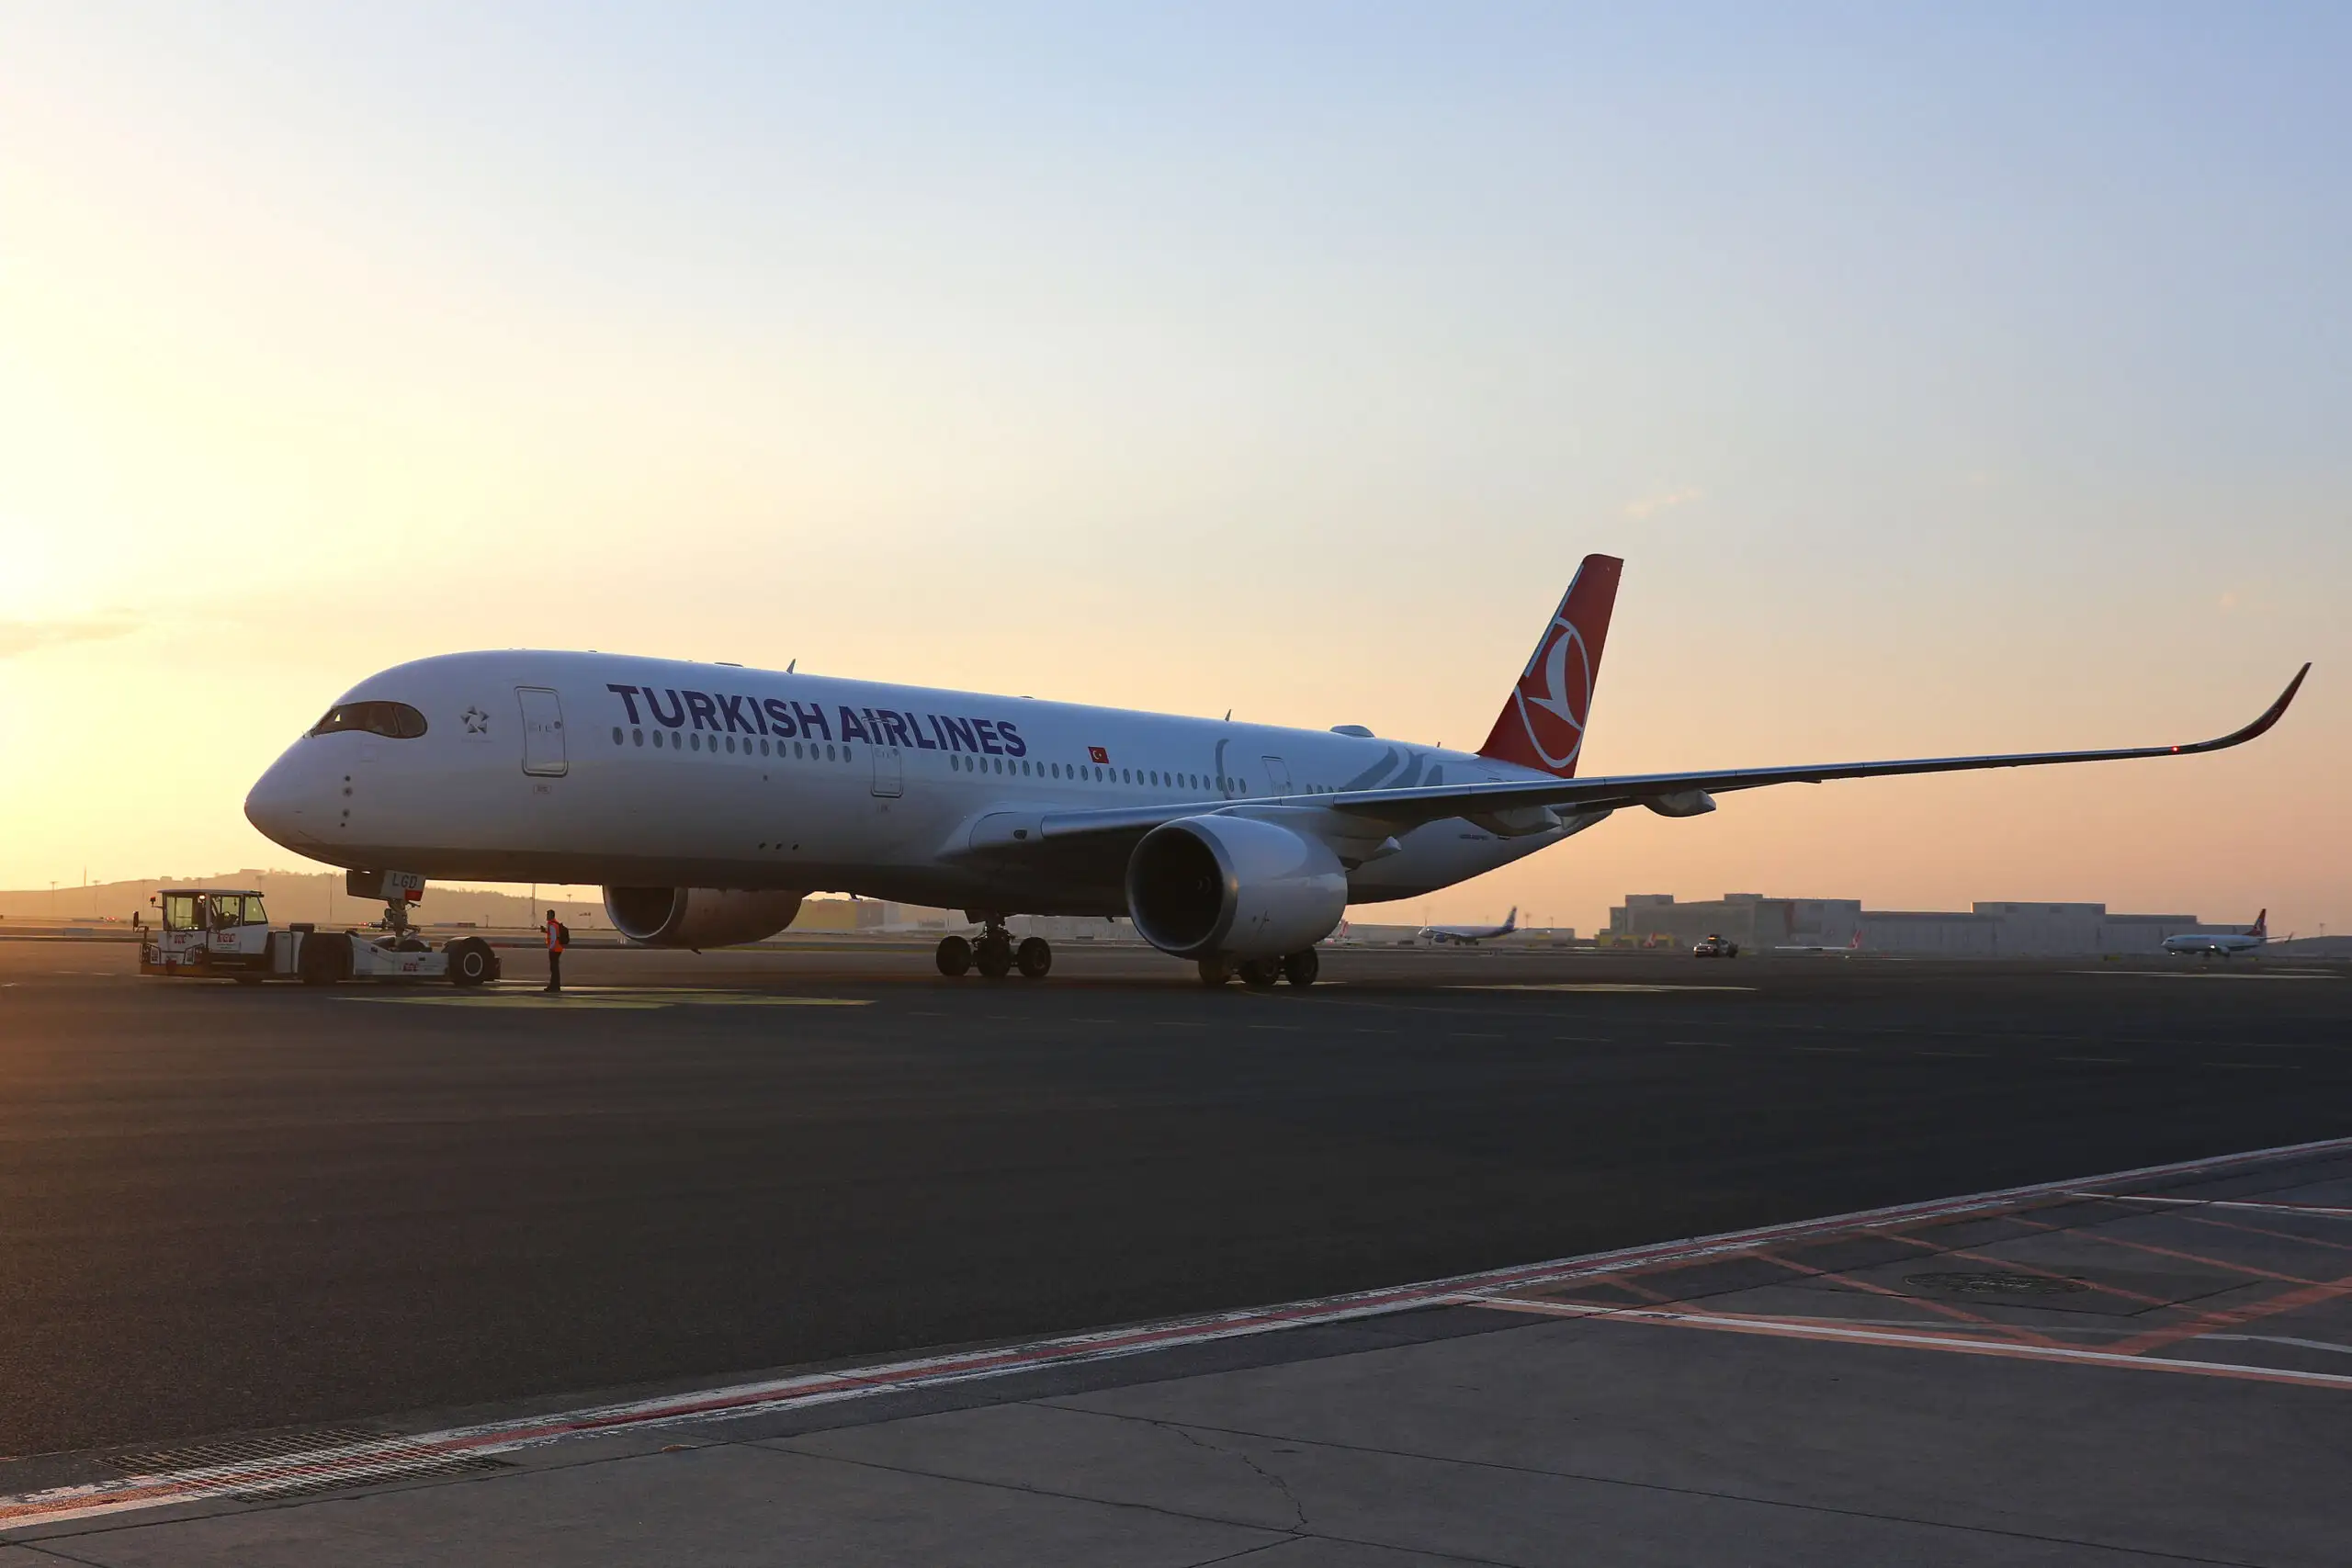 Turkish Airlines aircraft on the runway at dusk